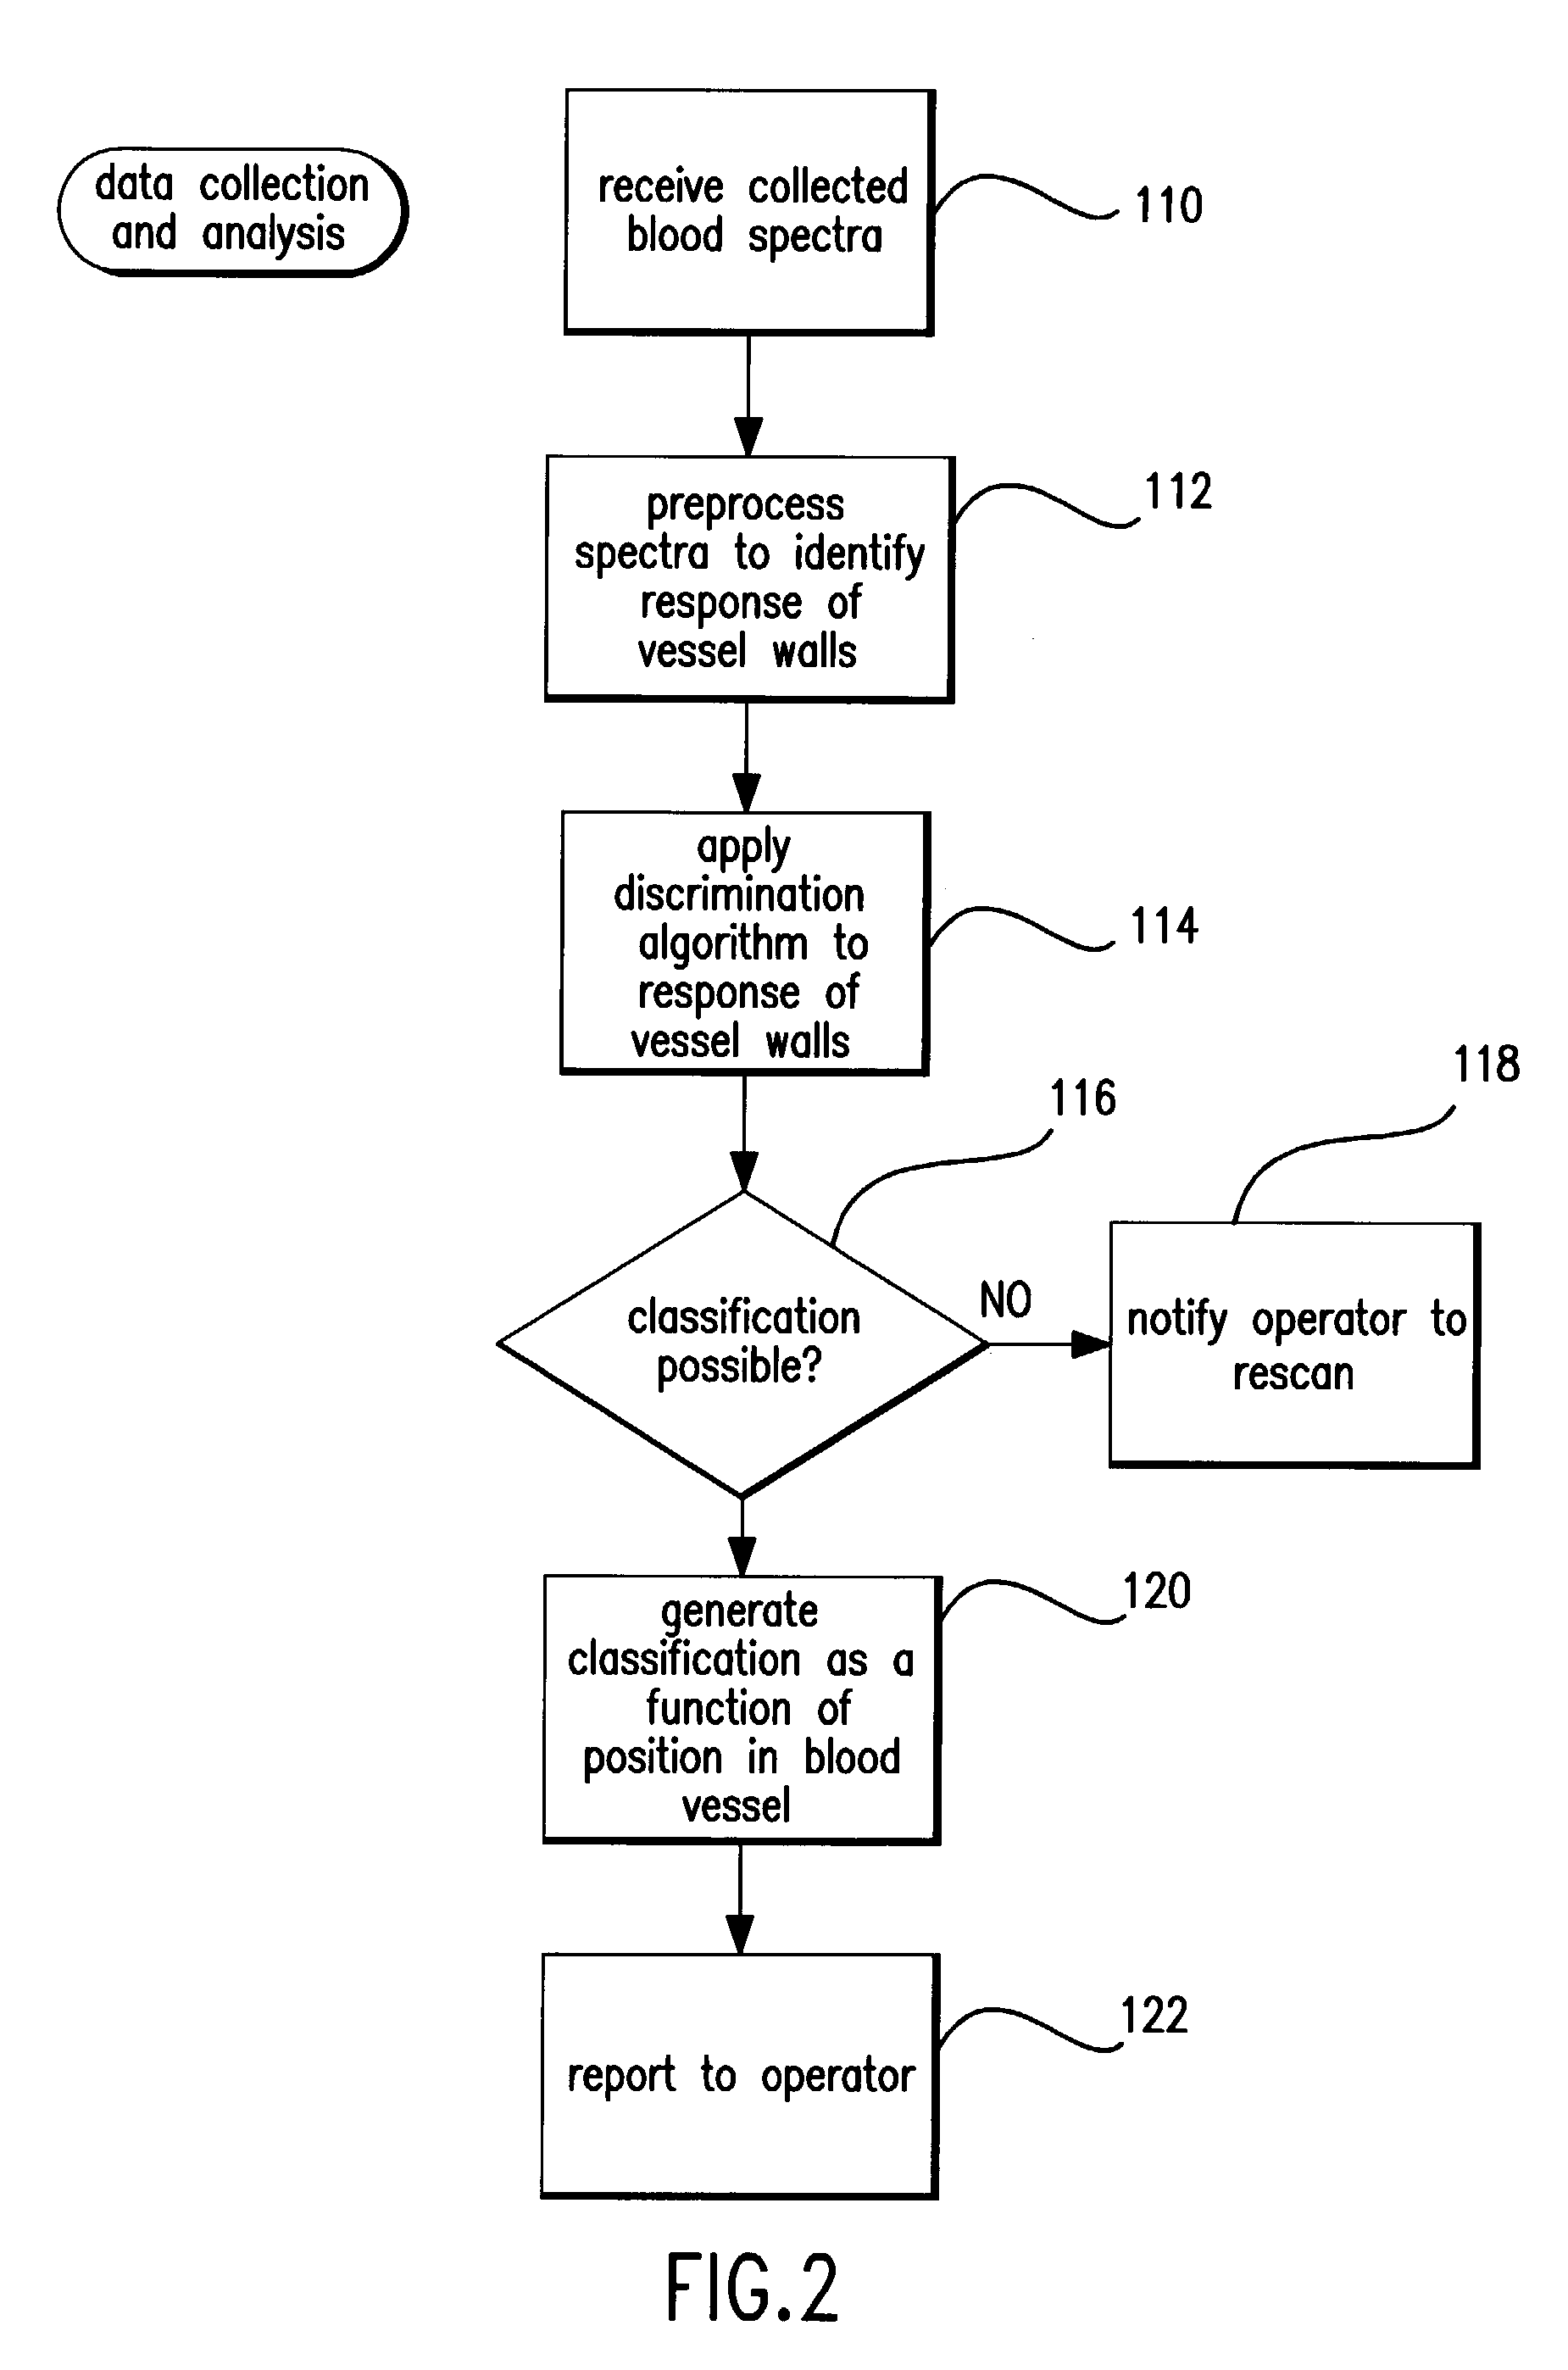 Spectroscopic unwanted signal filters for discrimination of vulnerable plaque and method therefor